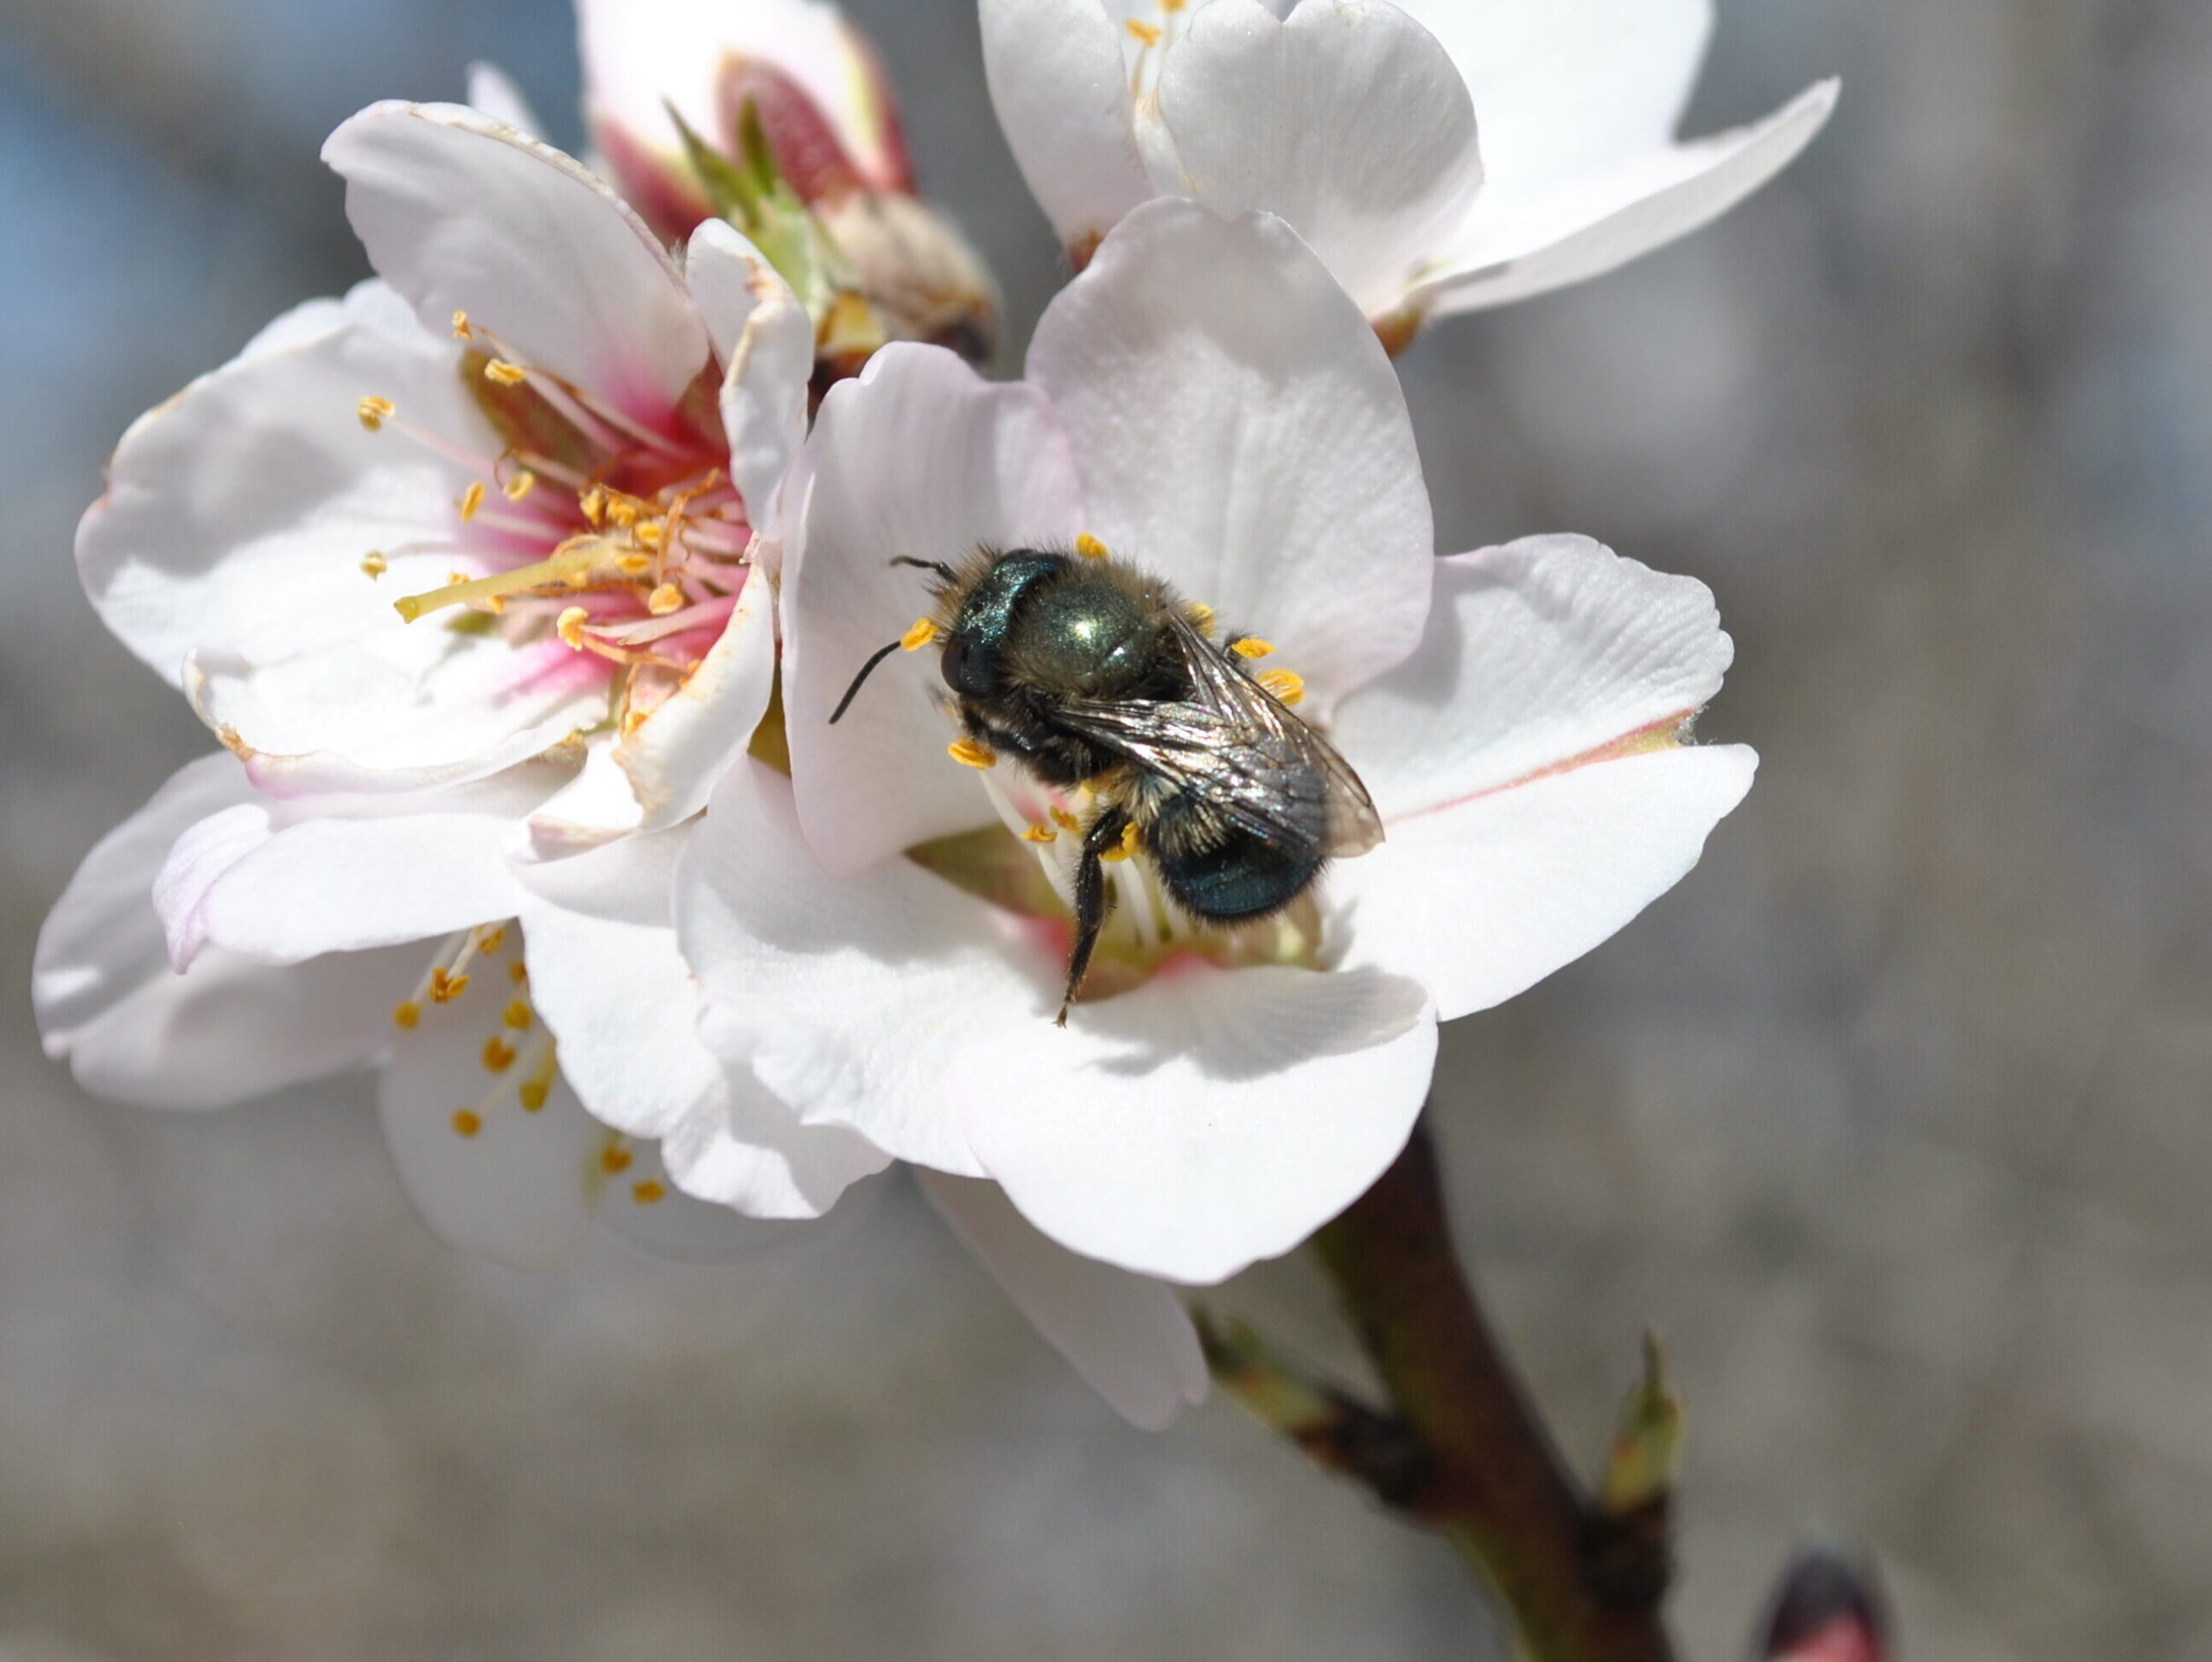 Close up image of a Blue Orchard Bee
(Osmia spp.) on a flower.